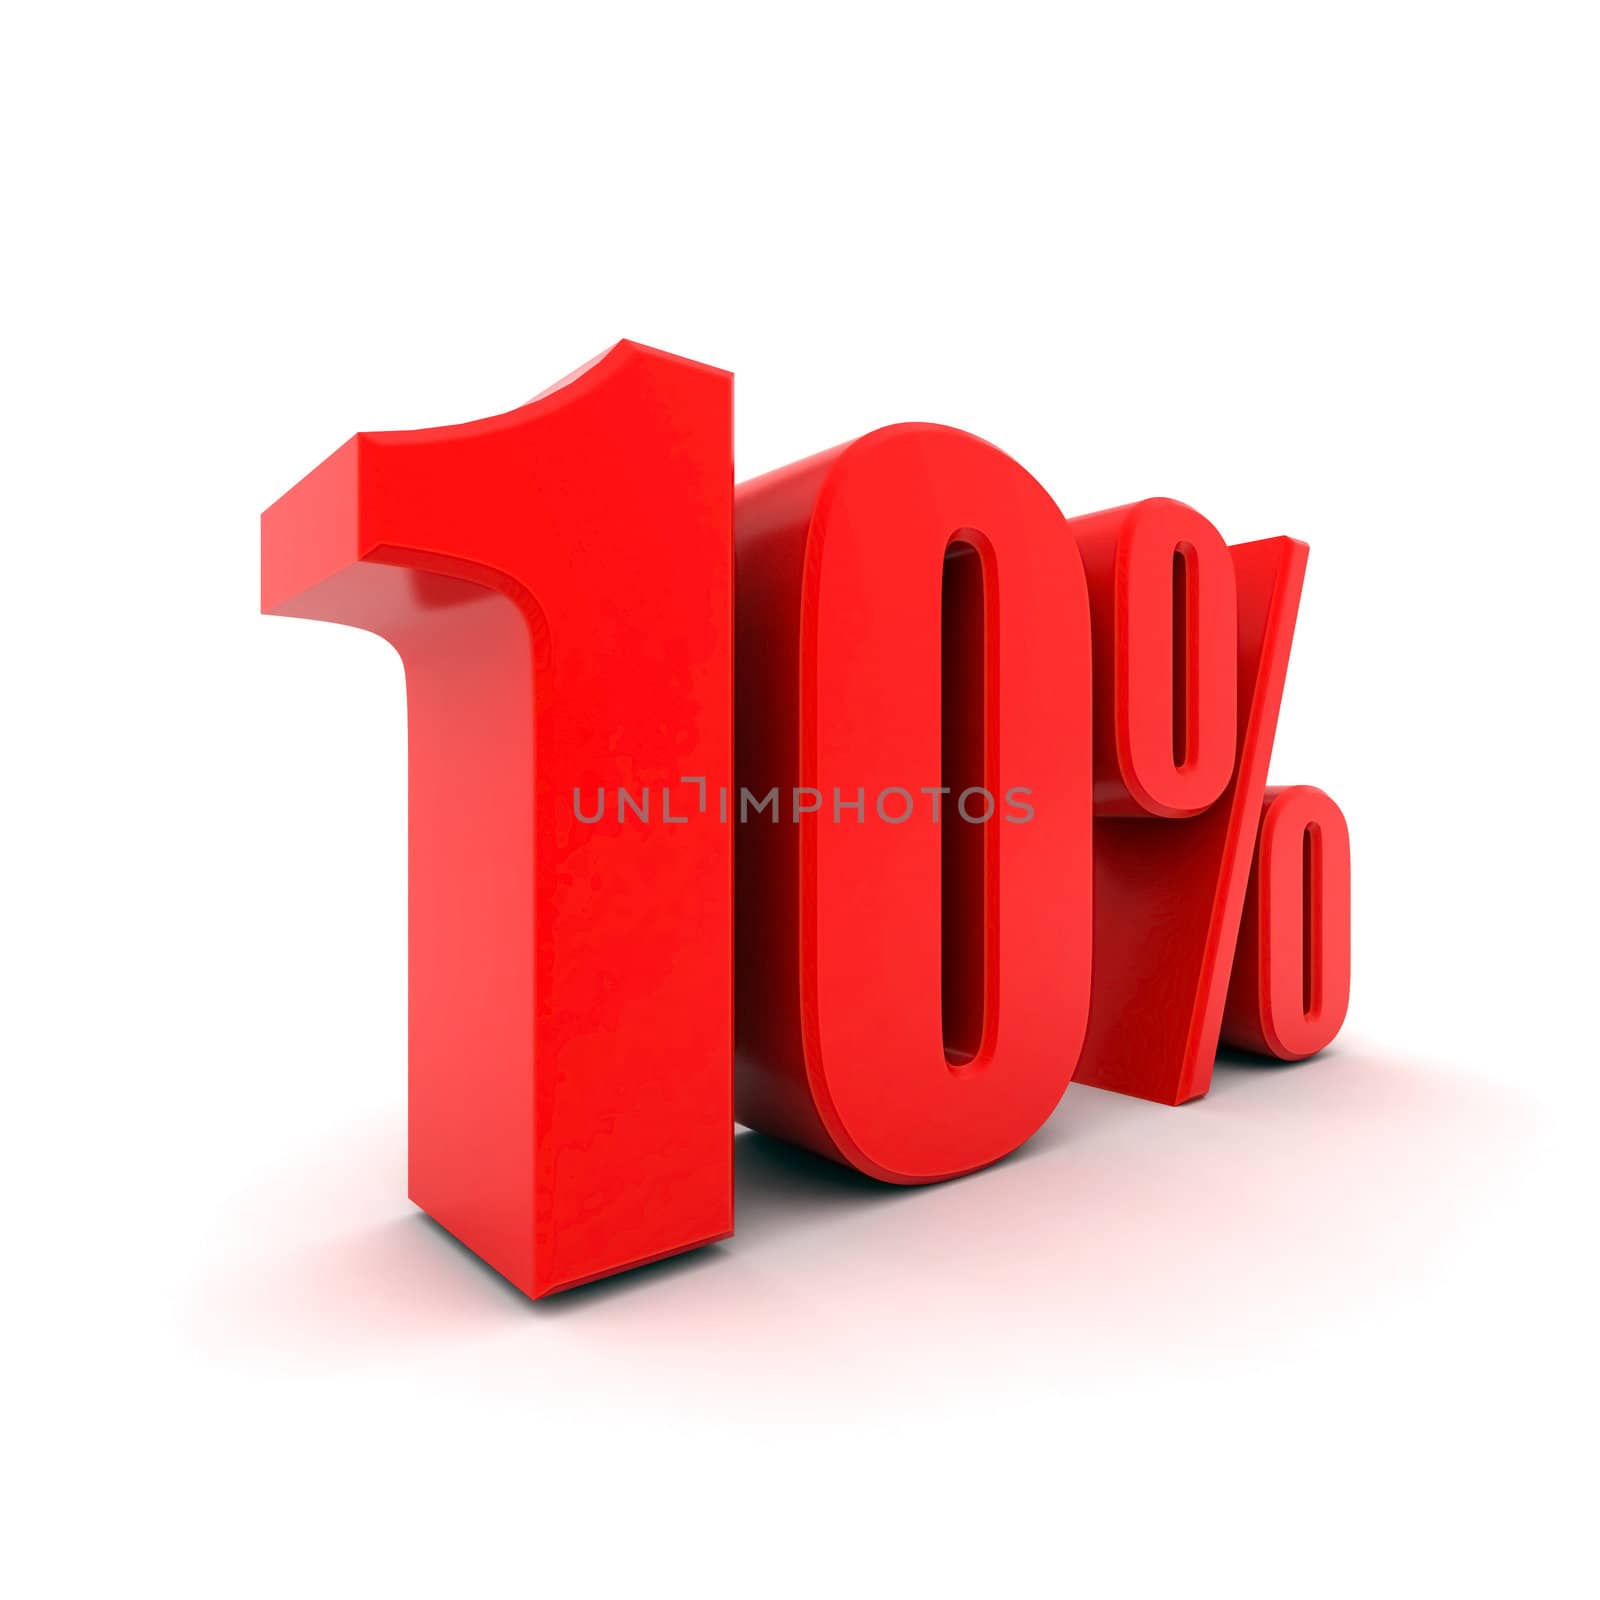 3D image of the text of a big sale